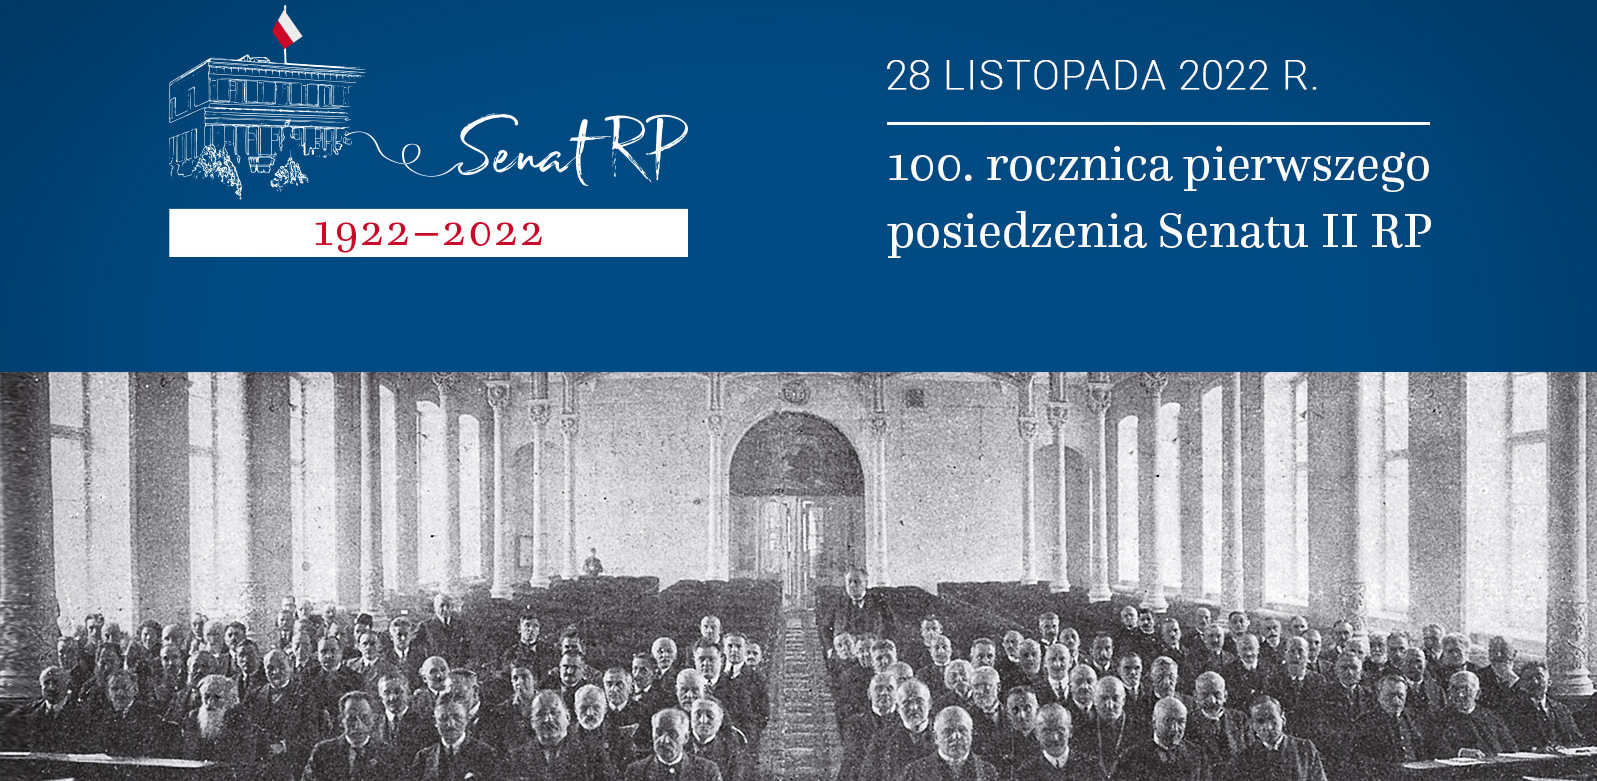 100th anniversary of the first session of the Senate.  The president will attend the ceremony